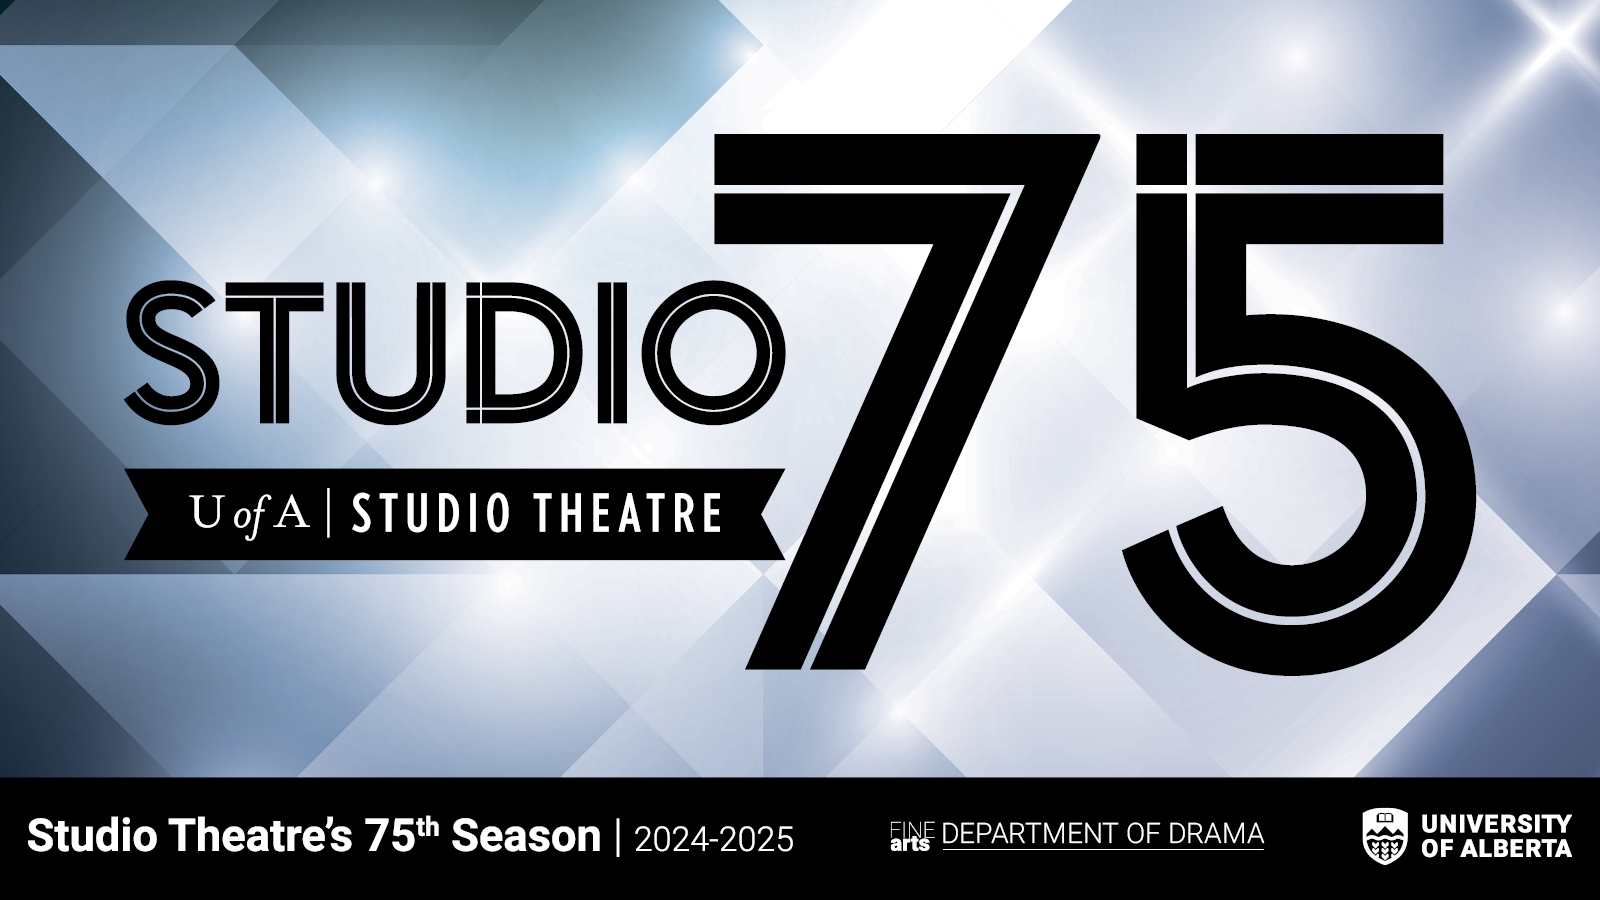 Diamond patterned background with black text reading "Studio 75 UofA Studio Theatre" in the foreground and footer bar saying 'Studio Theatre's 75th Season | 2024-2025", and the Department of Drama and University of Alberta wordmarks.